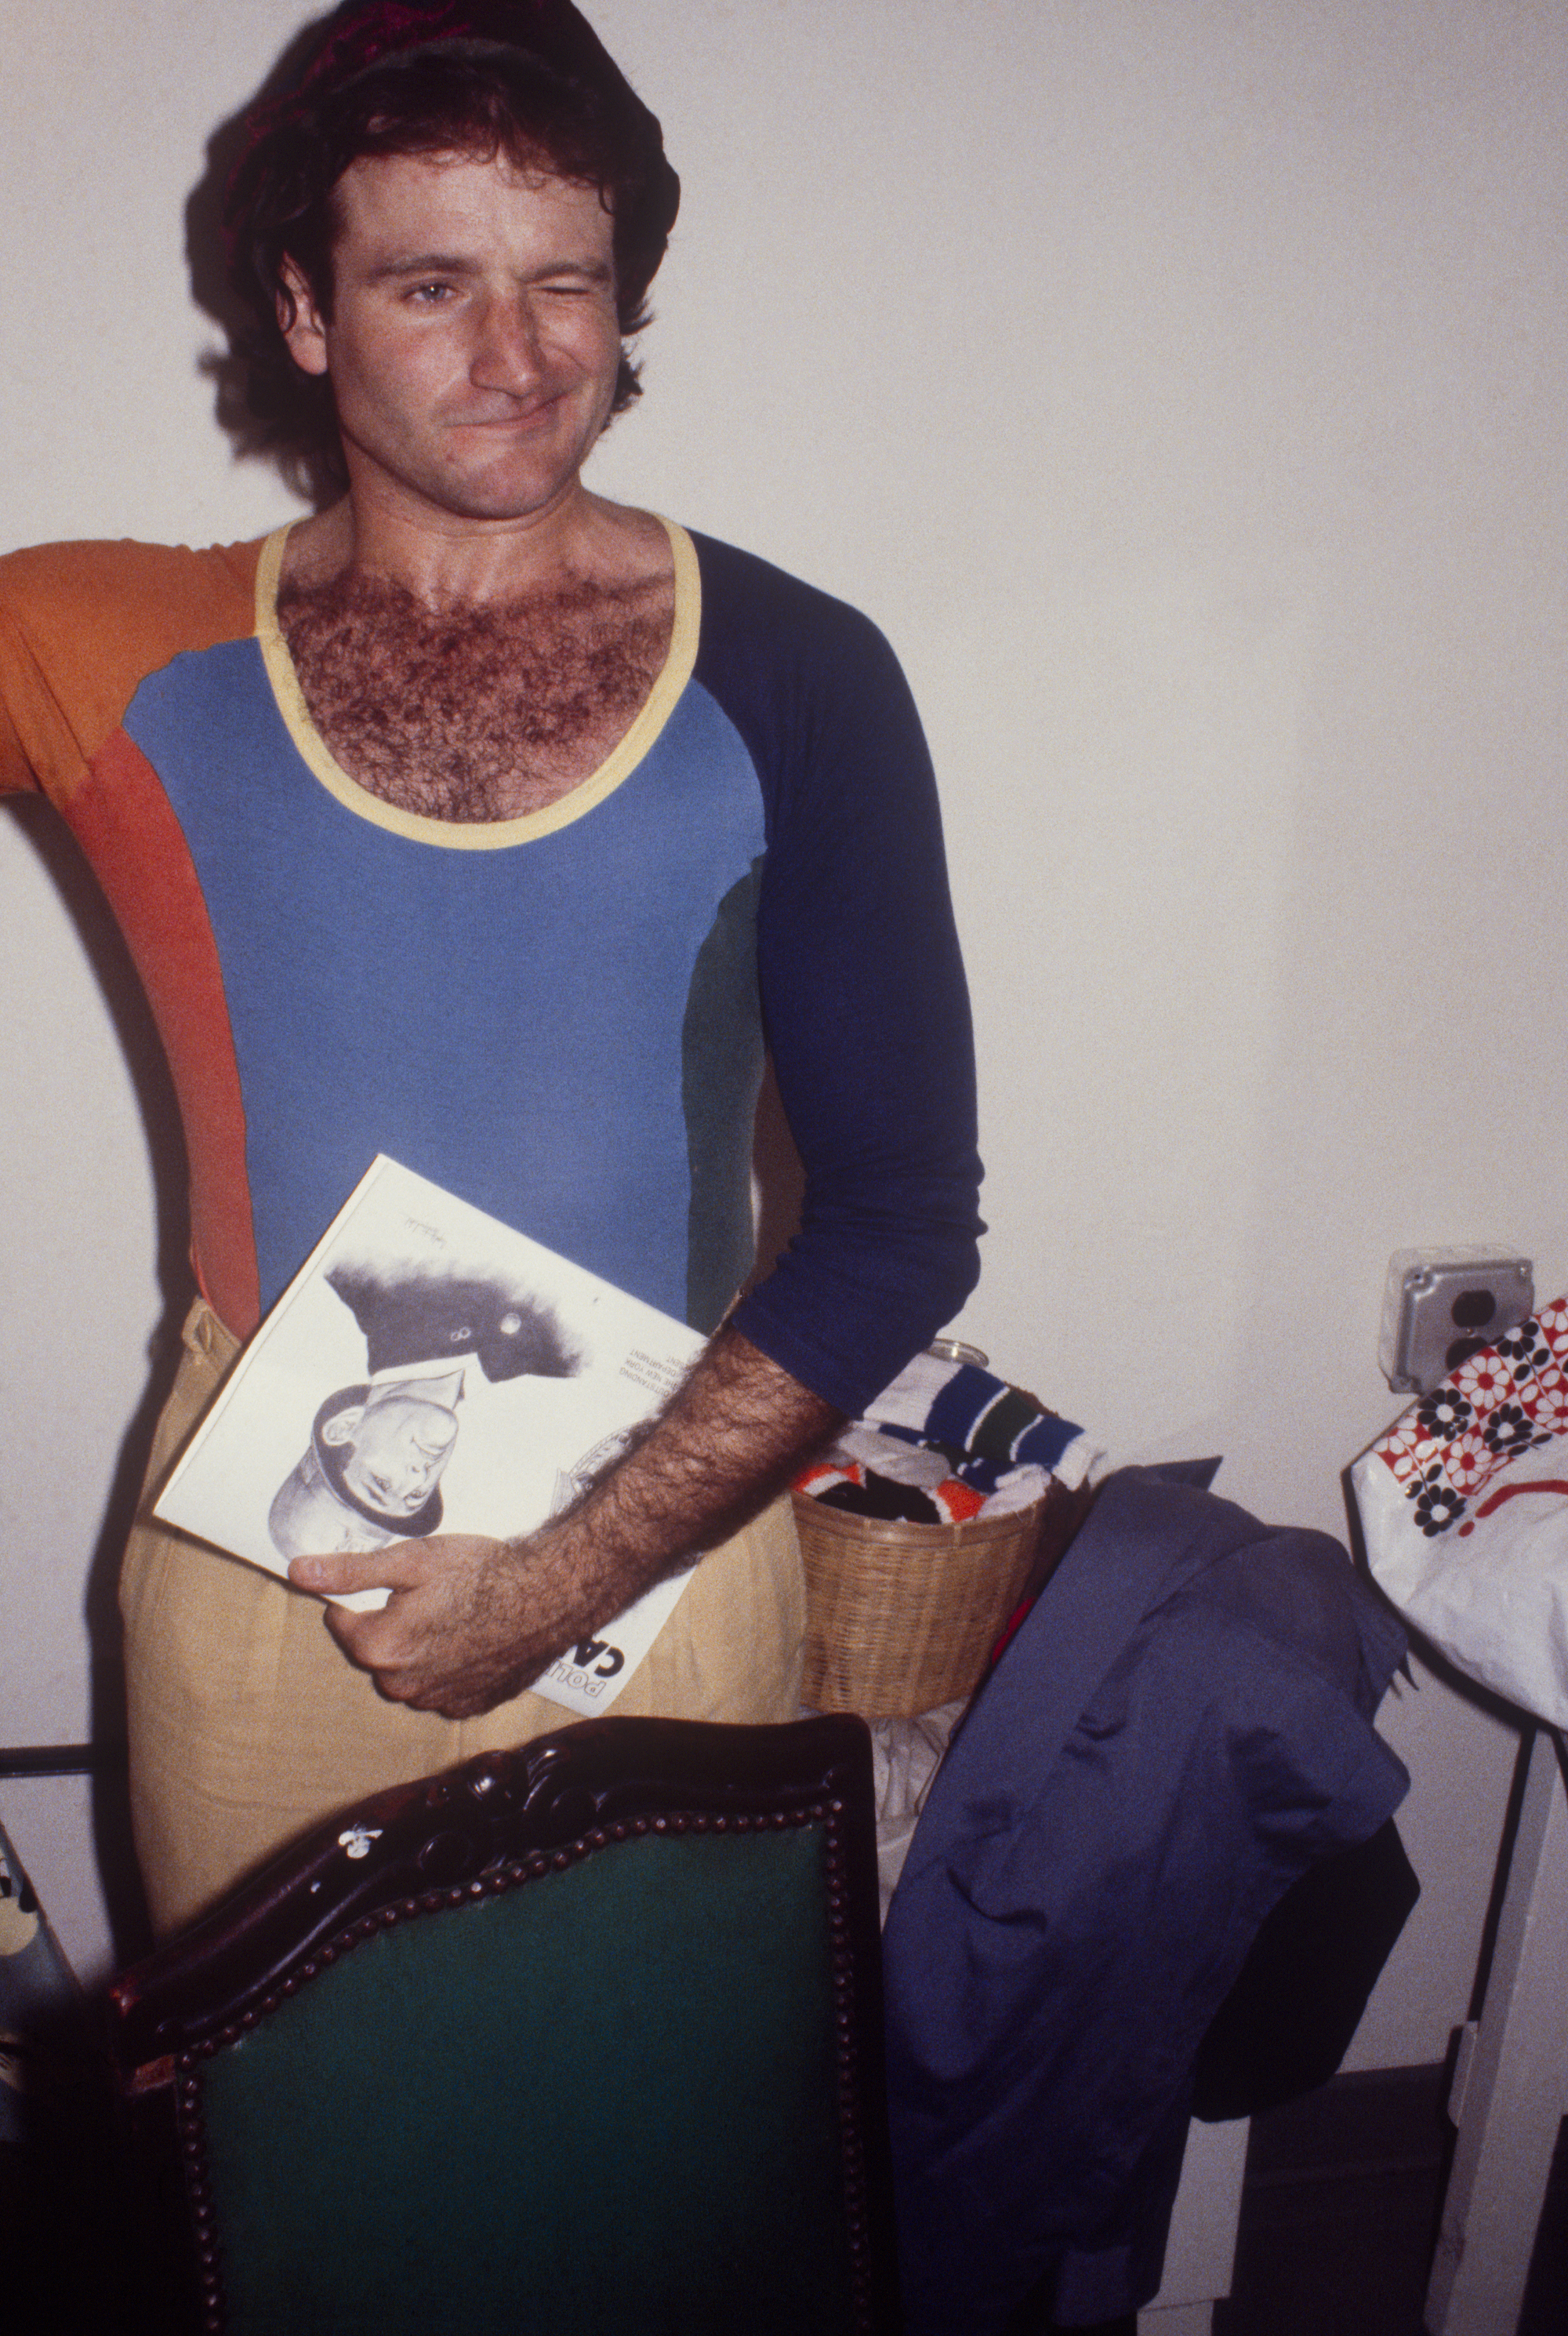 Robin Williams in a tight fitting multi-coloured top and beige trousers in a house holding a magazine and winking